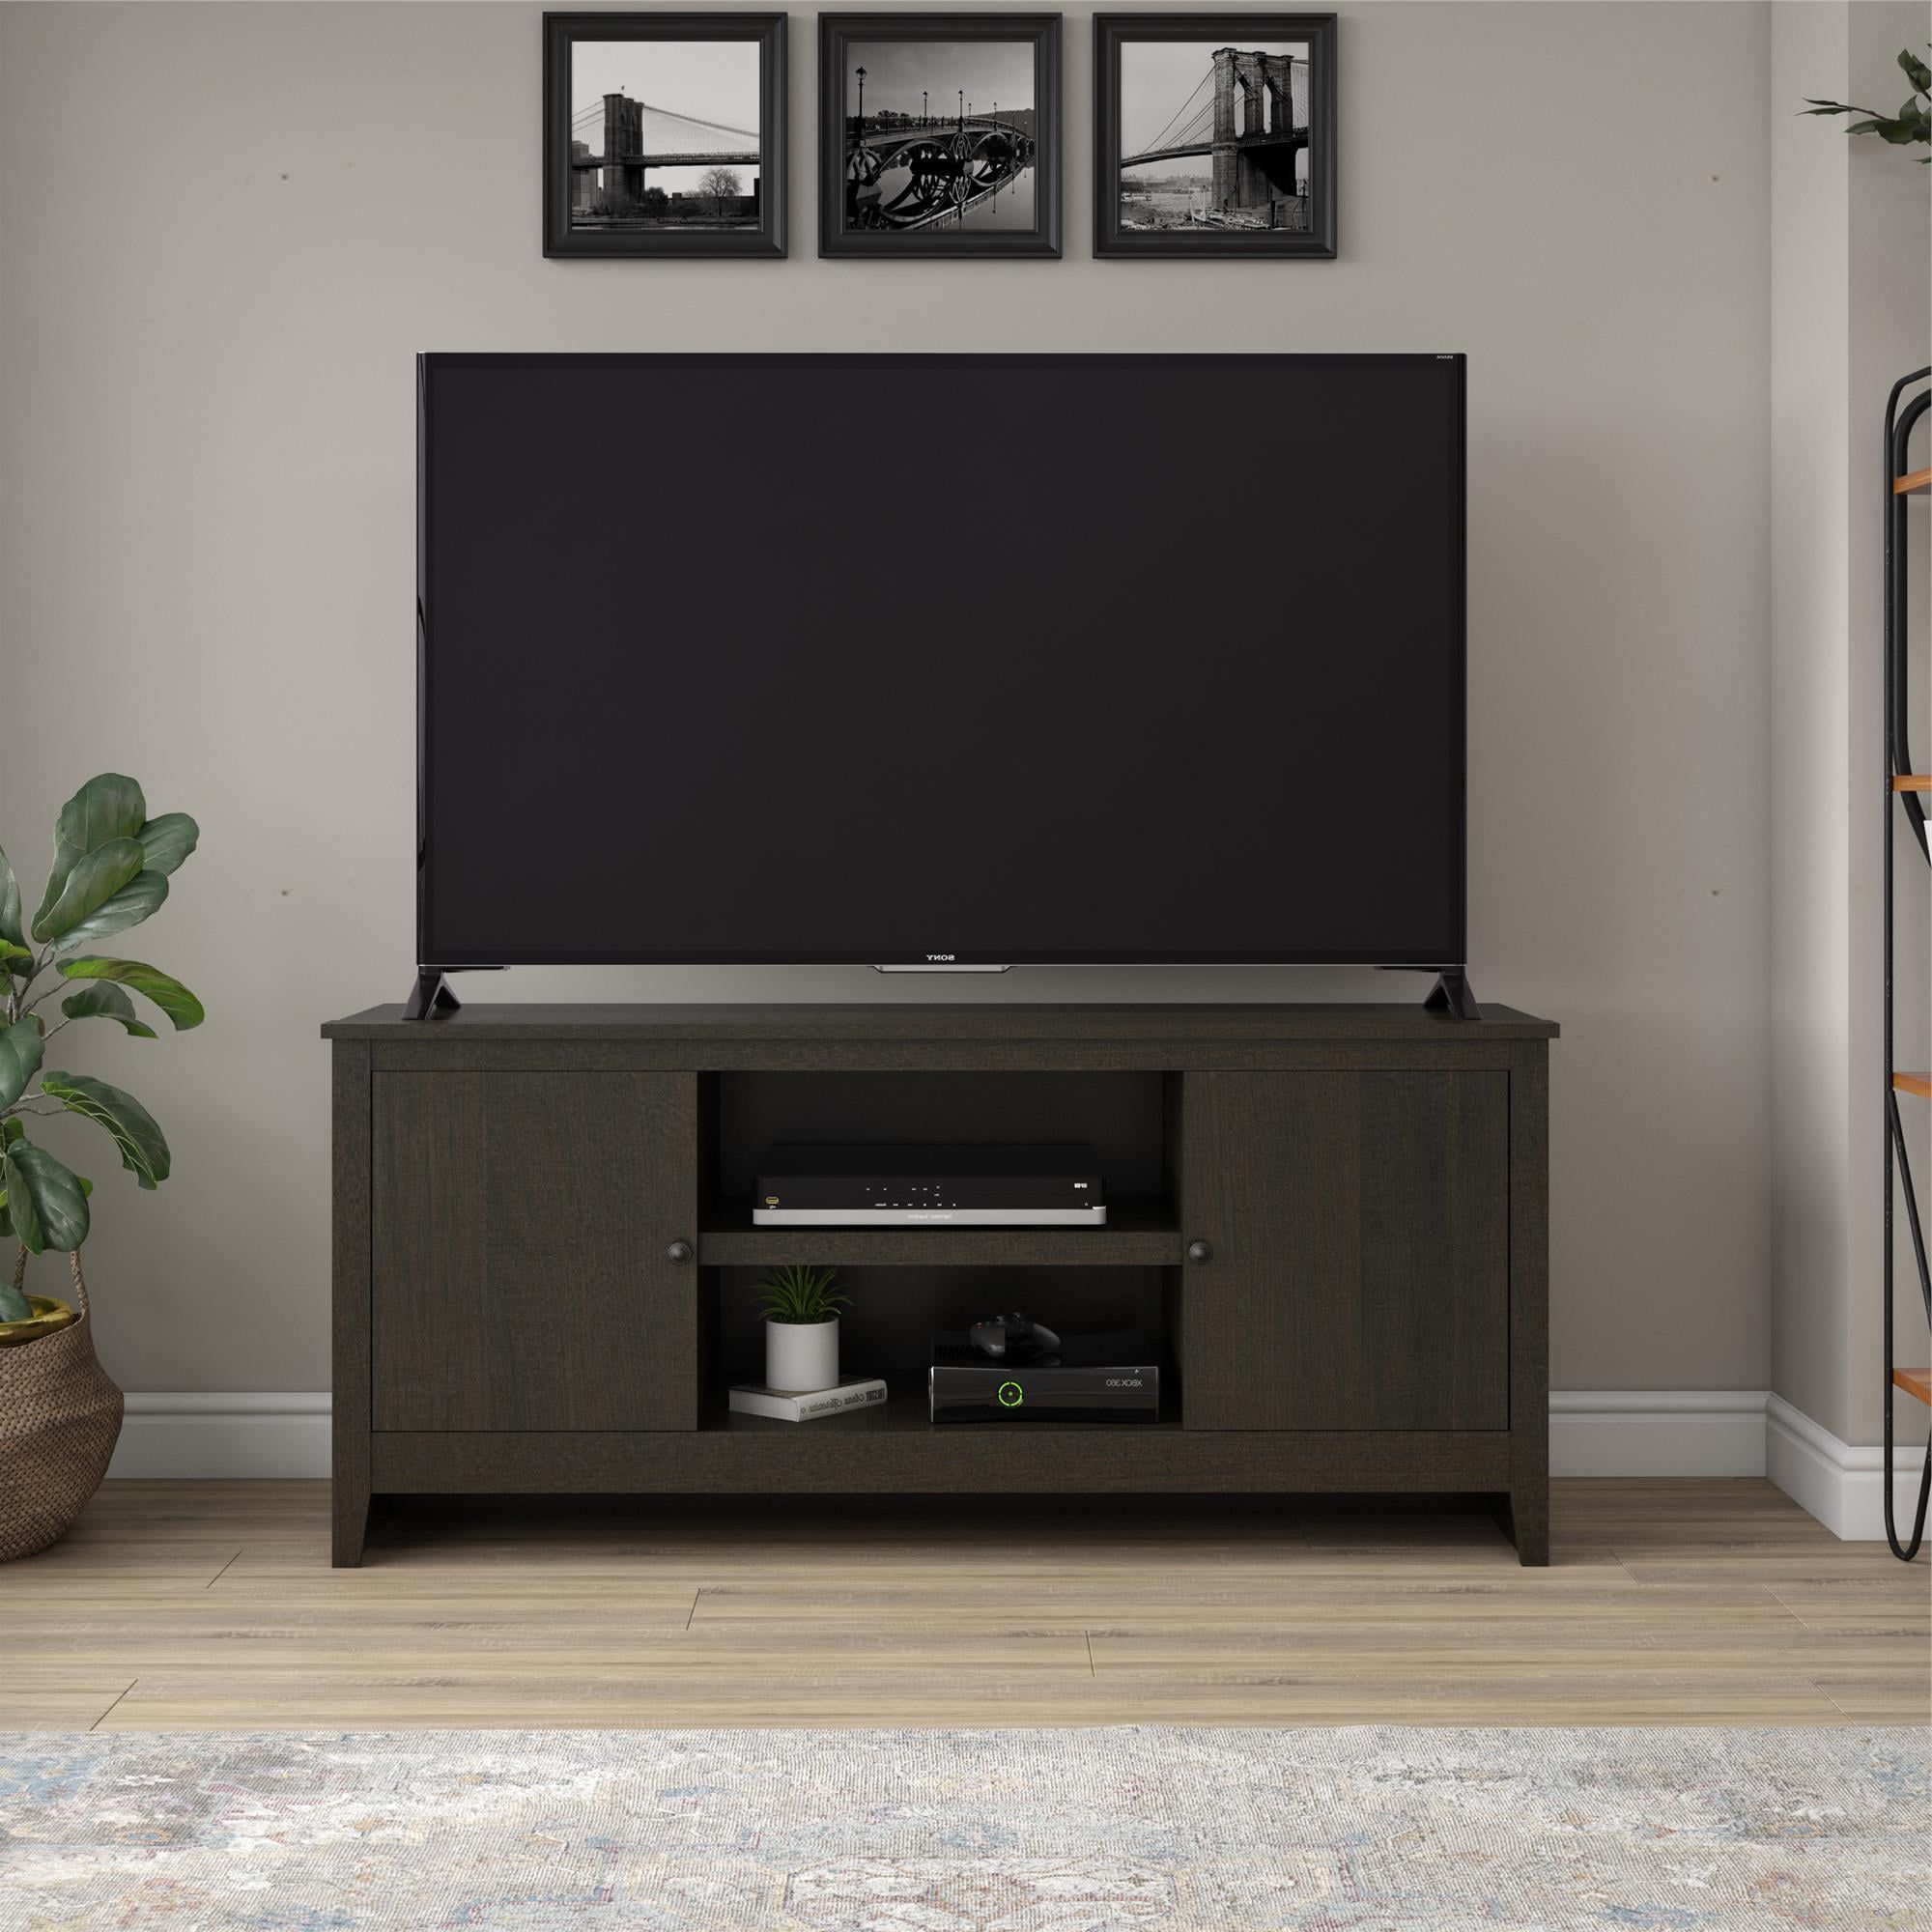 Fashionable Cafe Tv Stands With Storage Regarding Mainstays 65" Television Stand Espresso – Walmart (Photo 4 of 15)